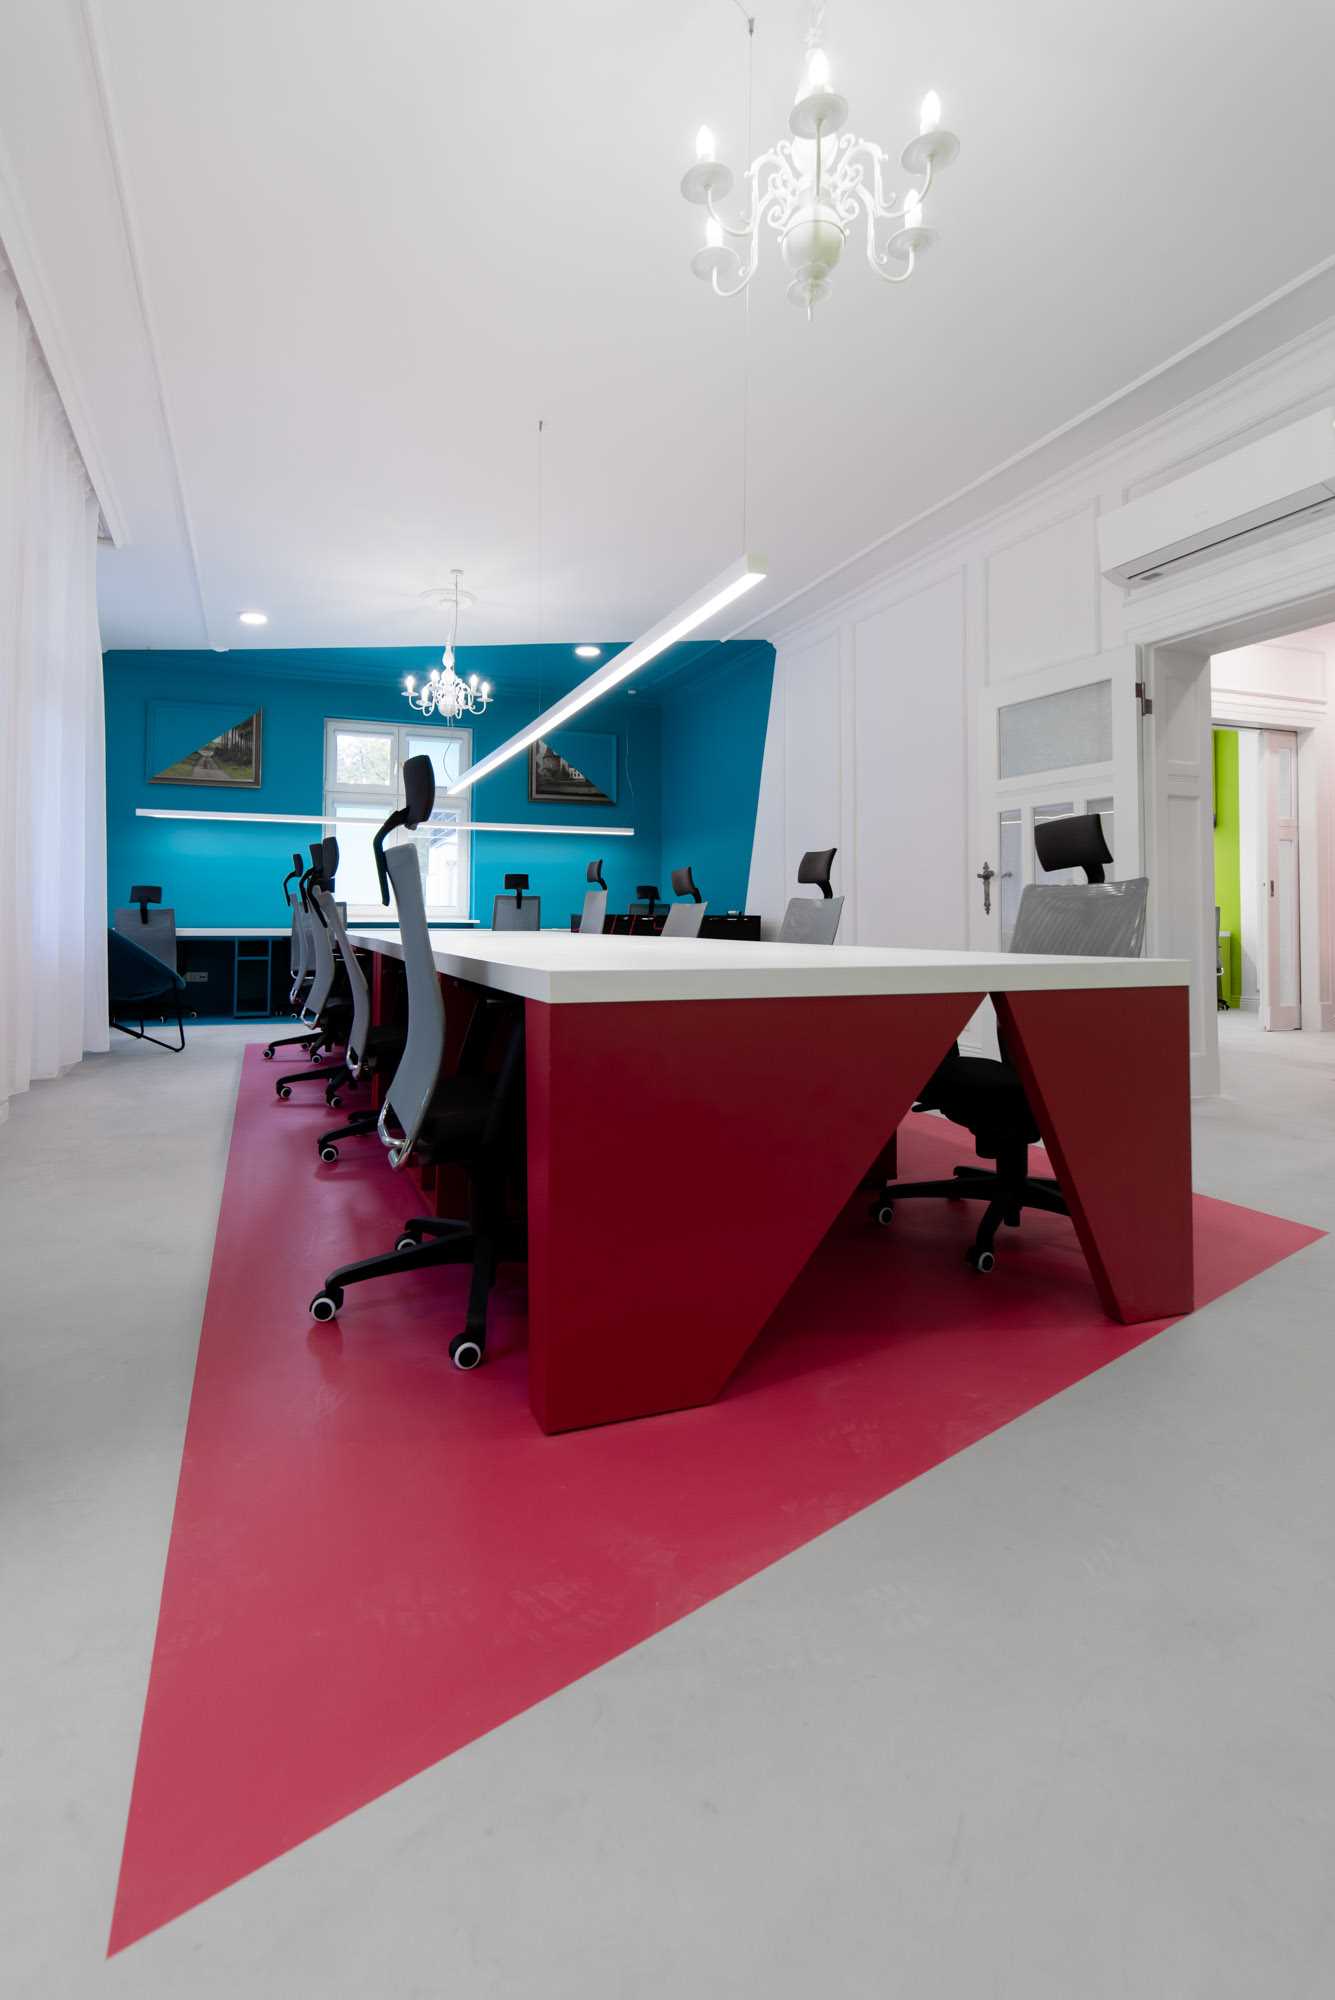 Bold colours in abstract designs create a unique look for this office interior.